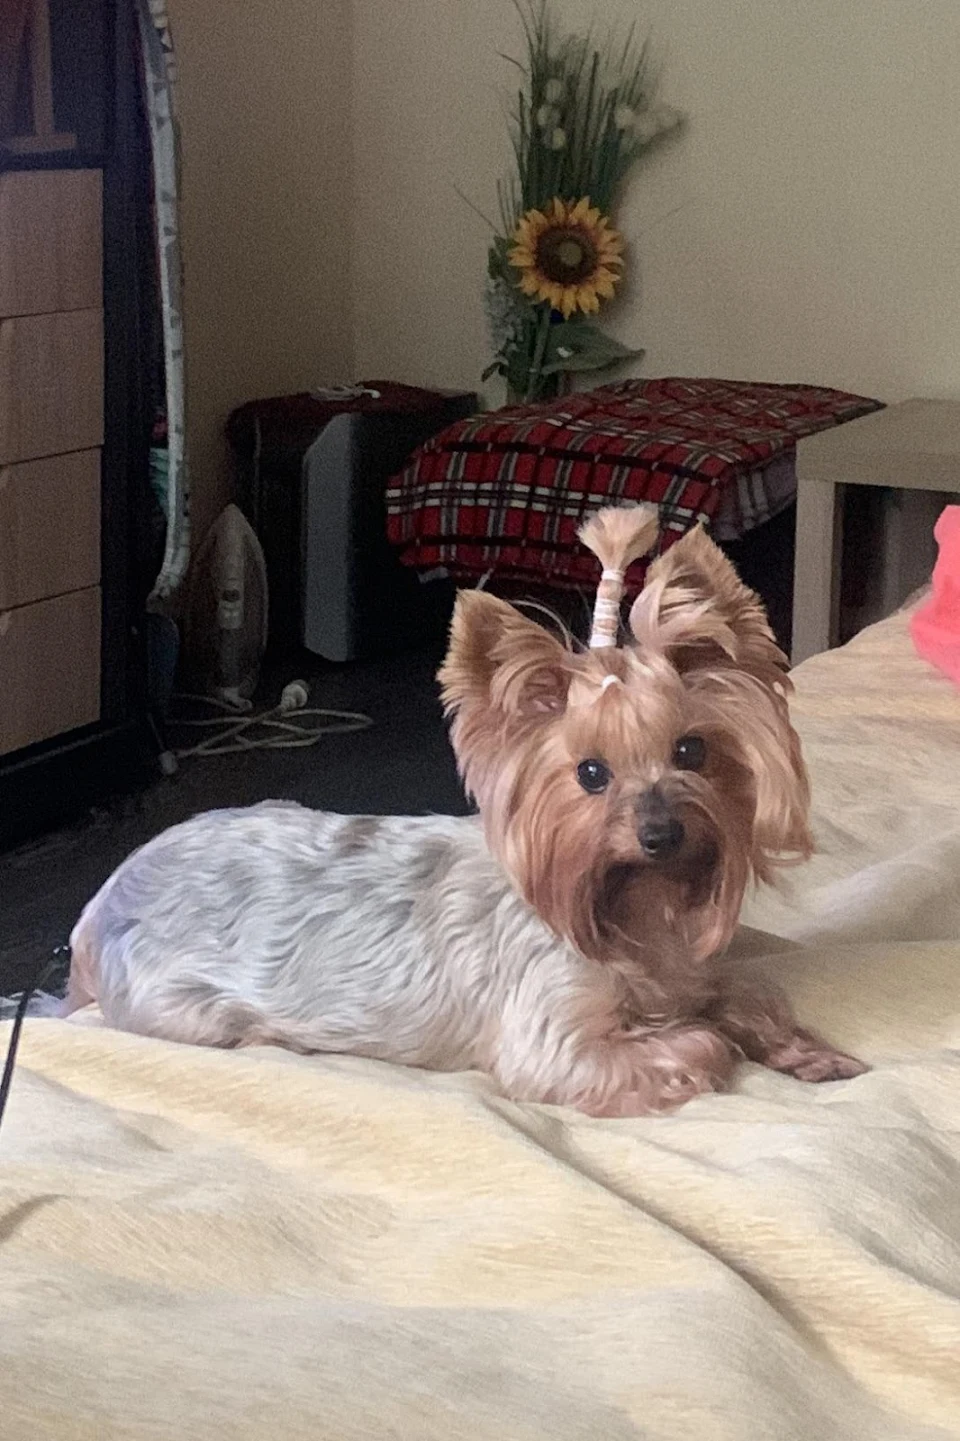 And our Yorkshire Terrier got a new haircut today